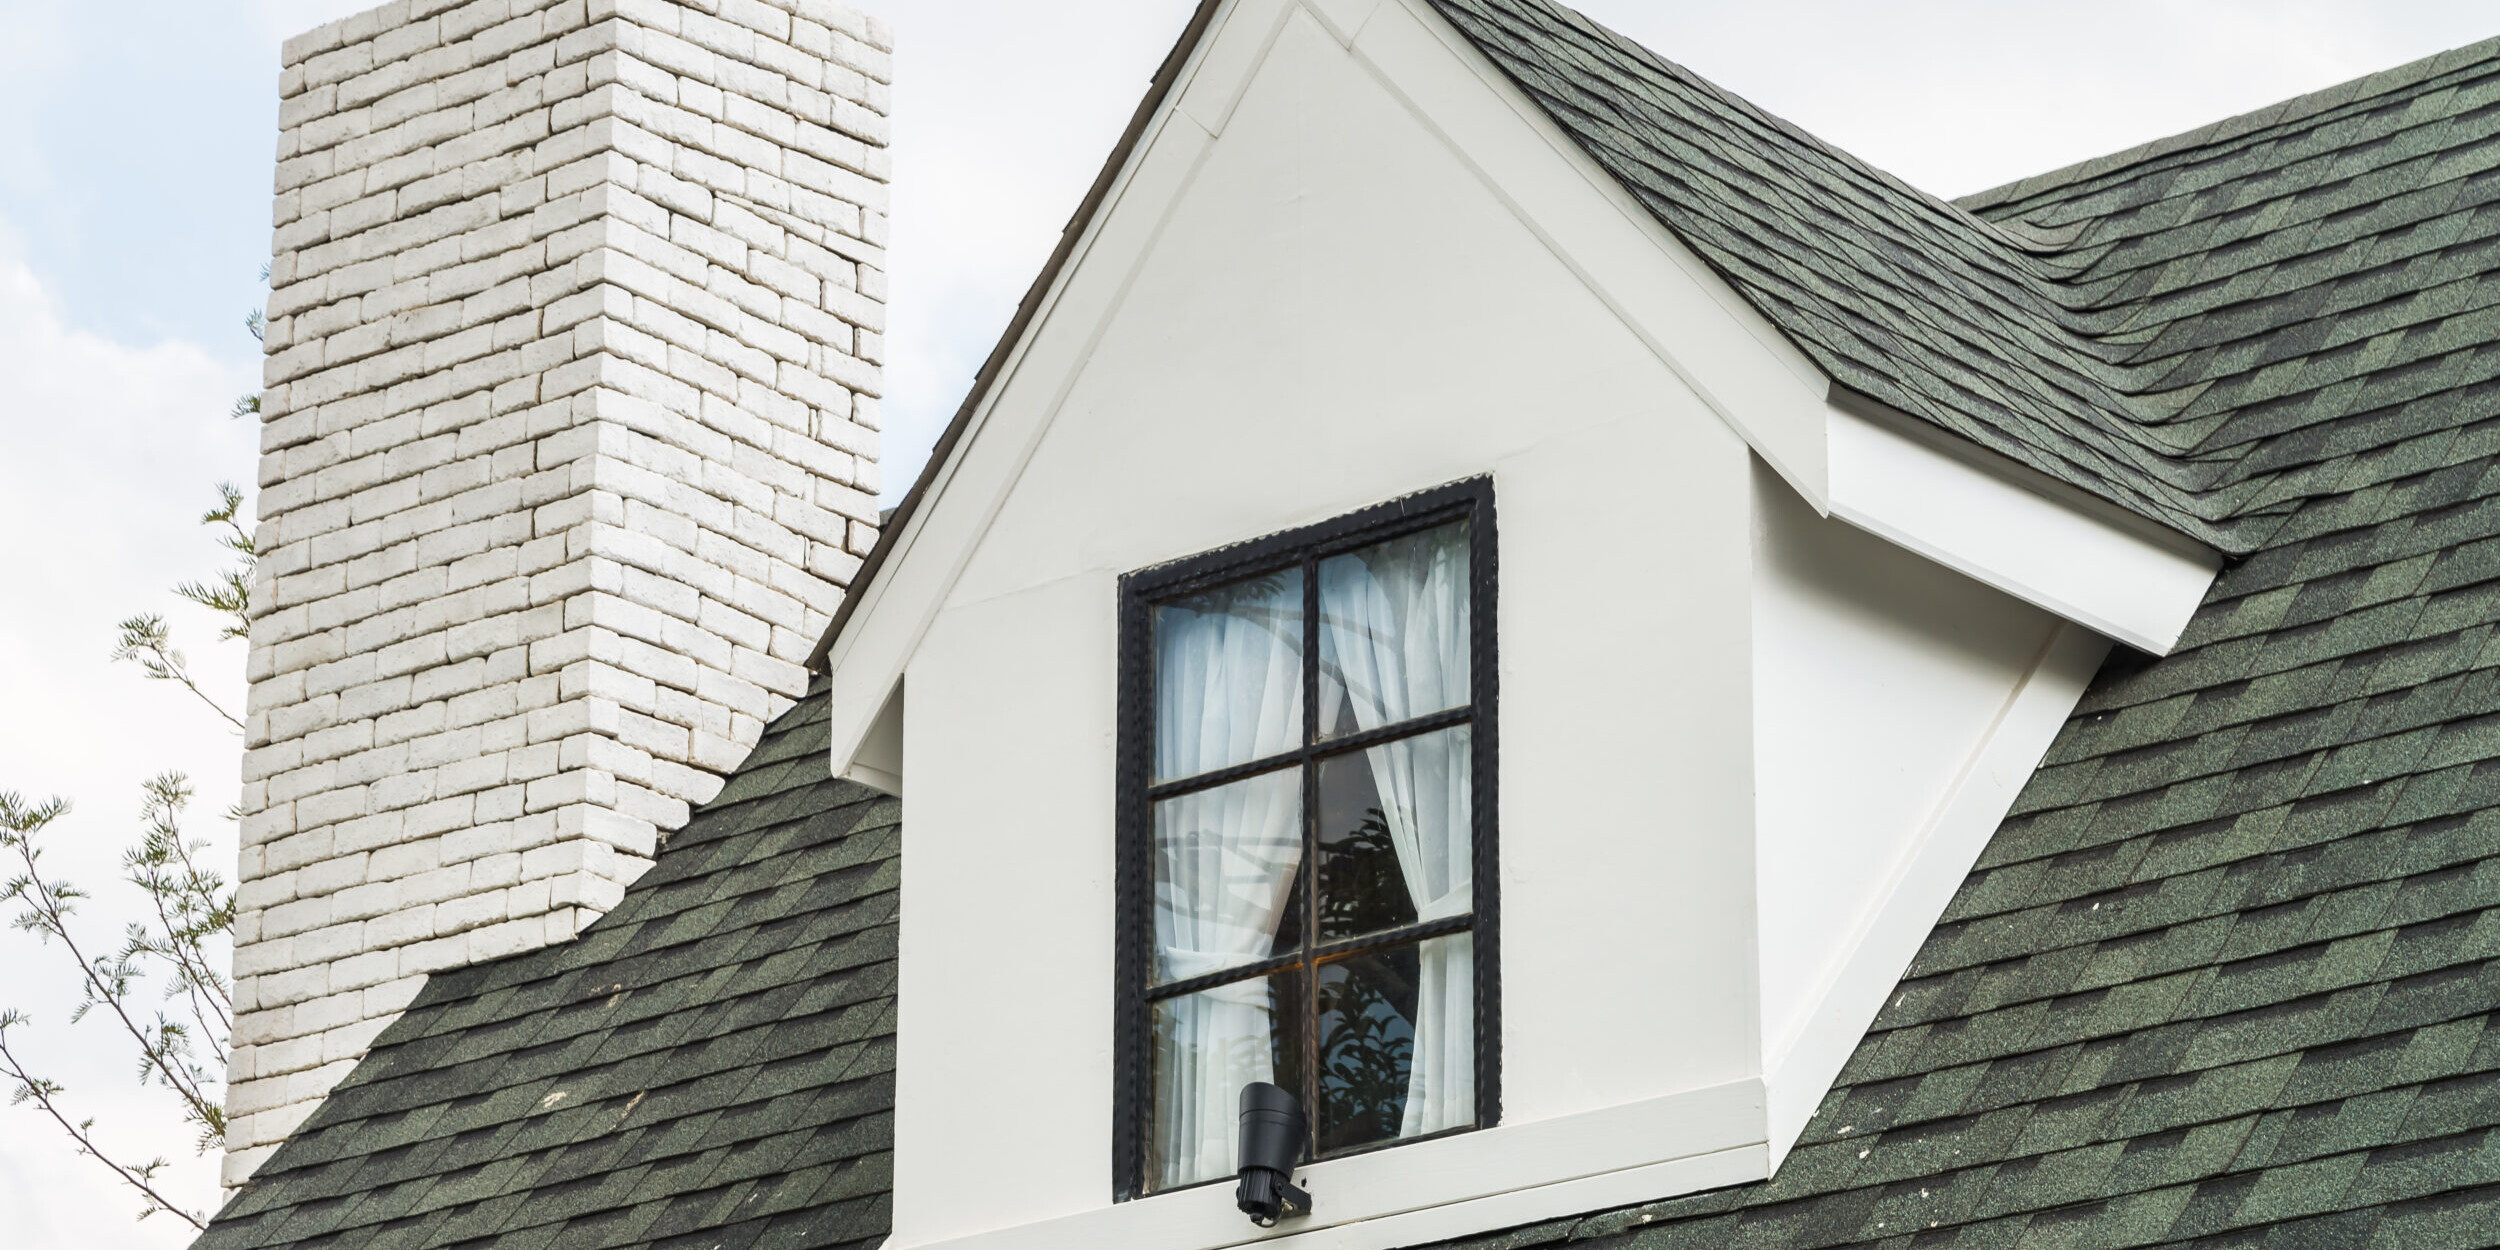 Can insurance pay for chimney when replacing roof?